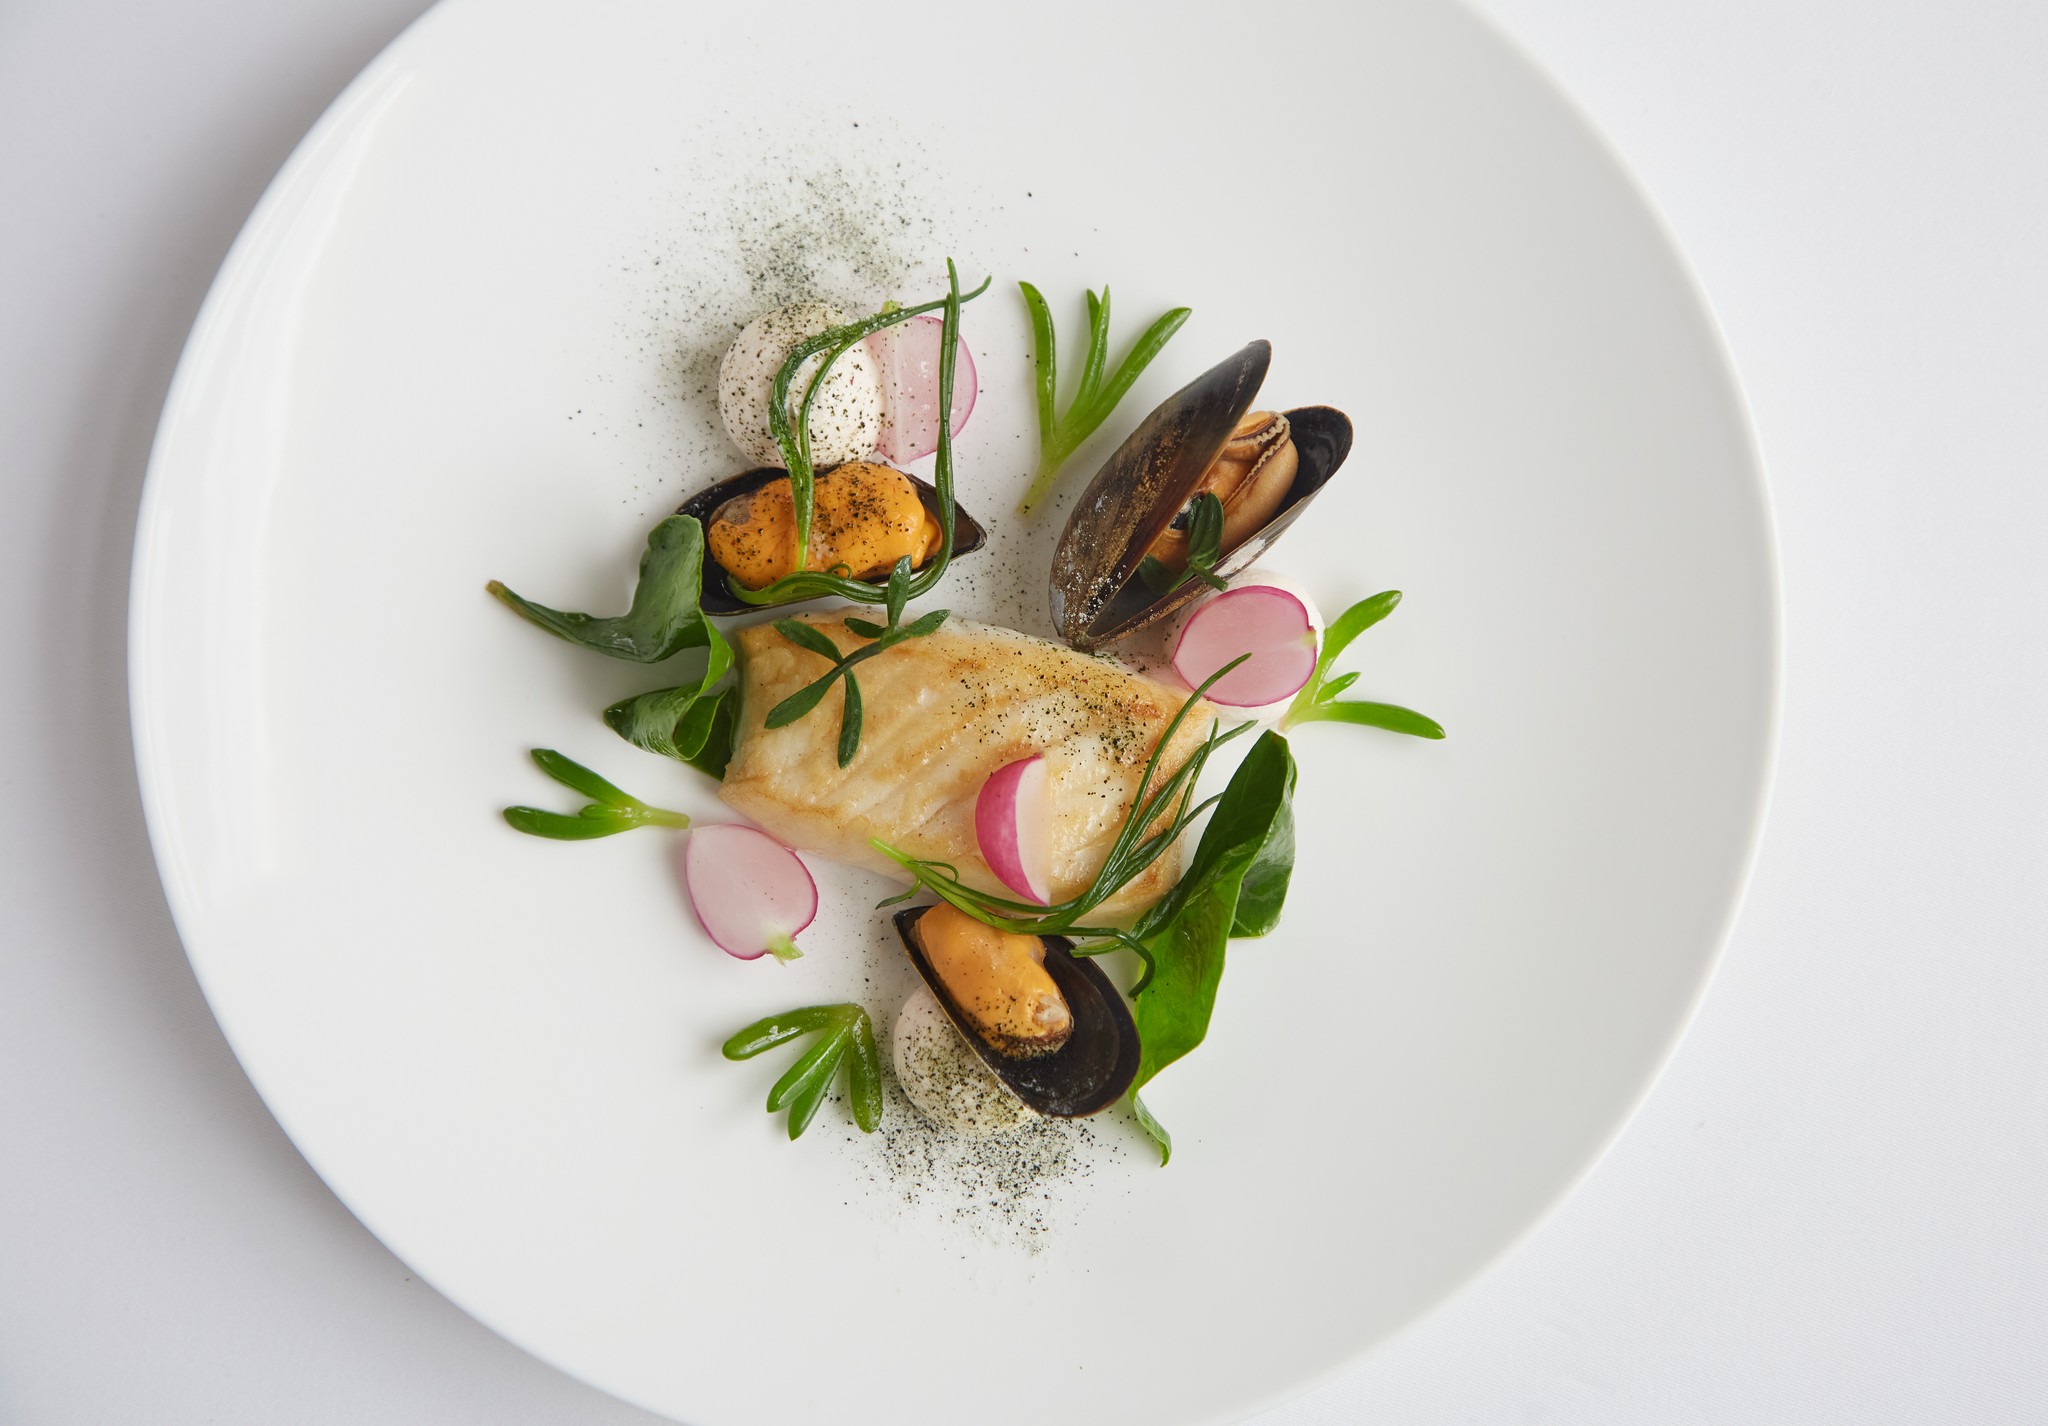 Overhead shot of Gigha halibut with smoked roe, Cornish mussels and radish